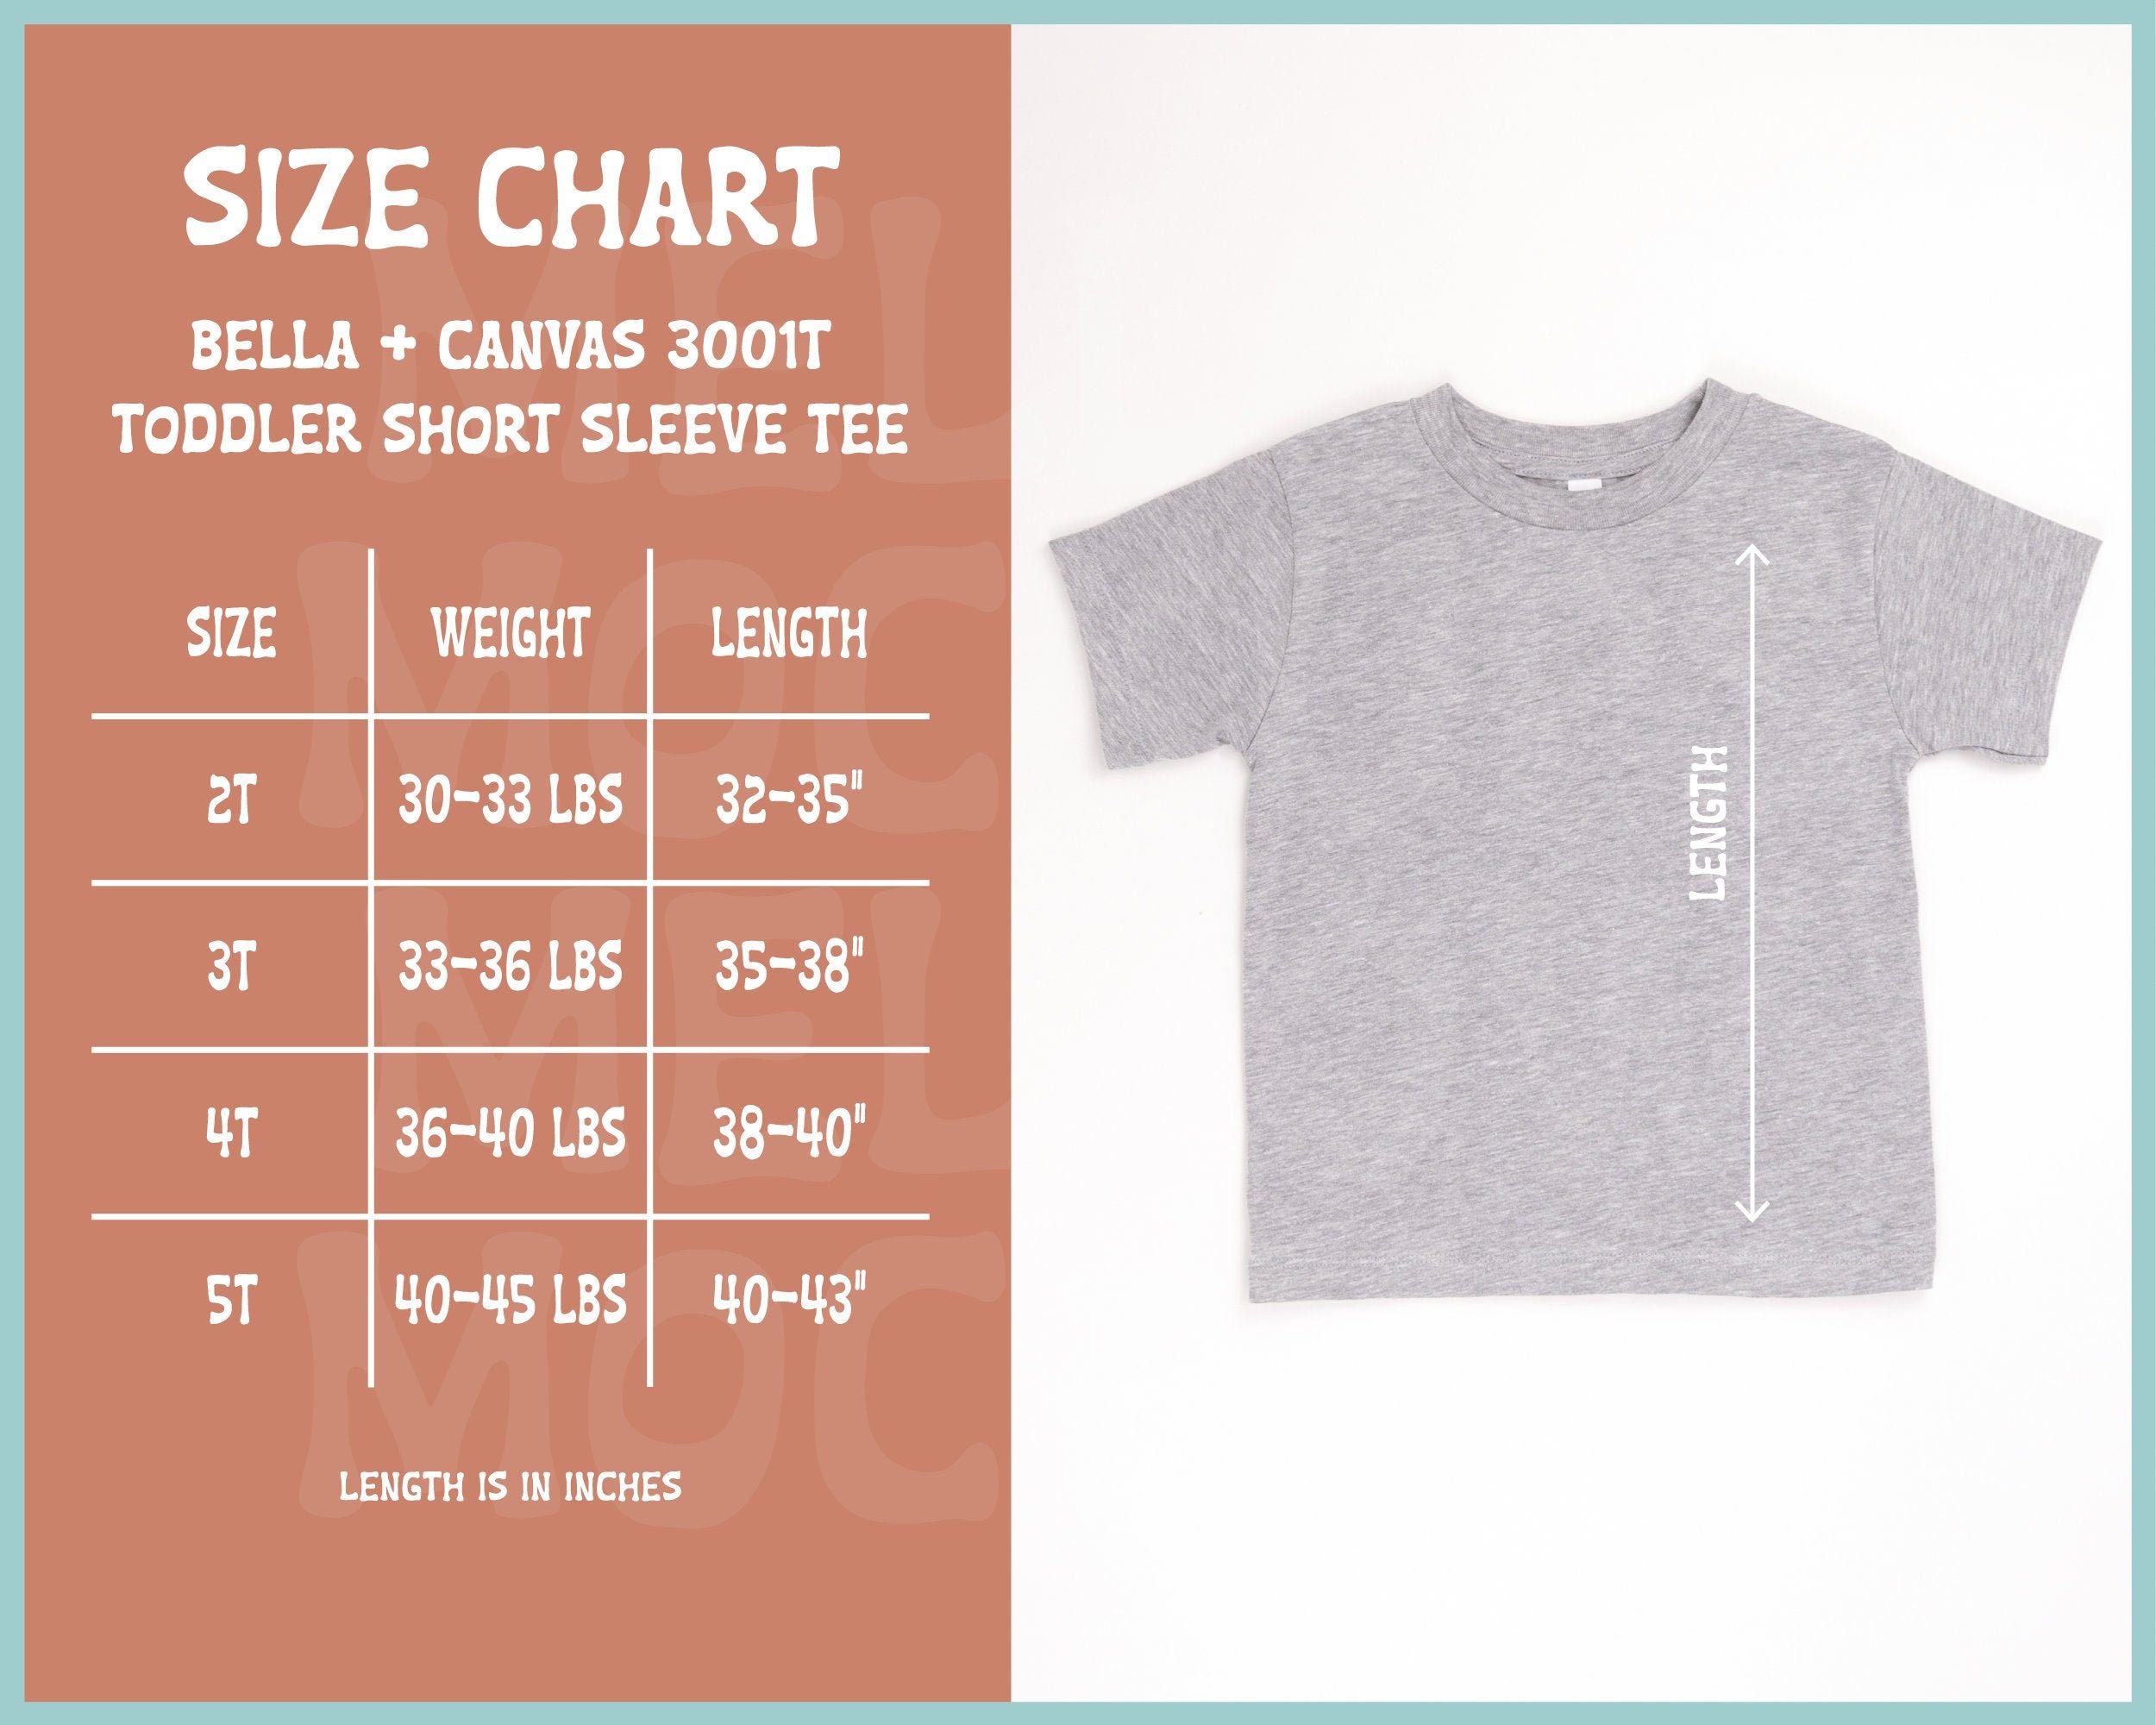 Bella Canvas 3001 Size Chart Athletic Heather Toddler Size | Etsy